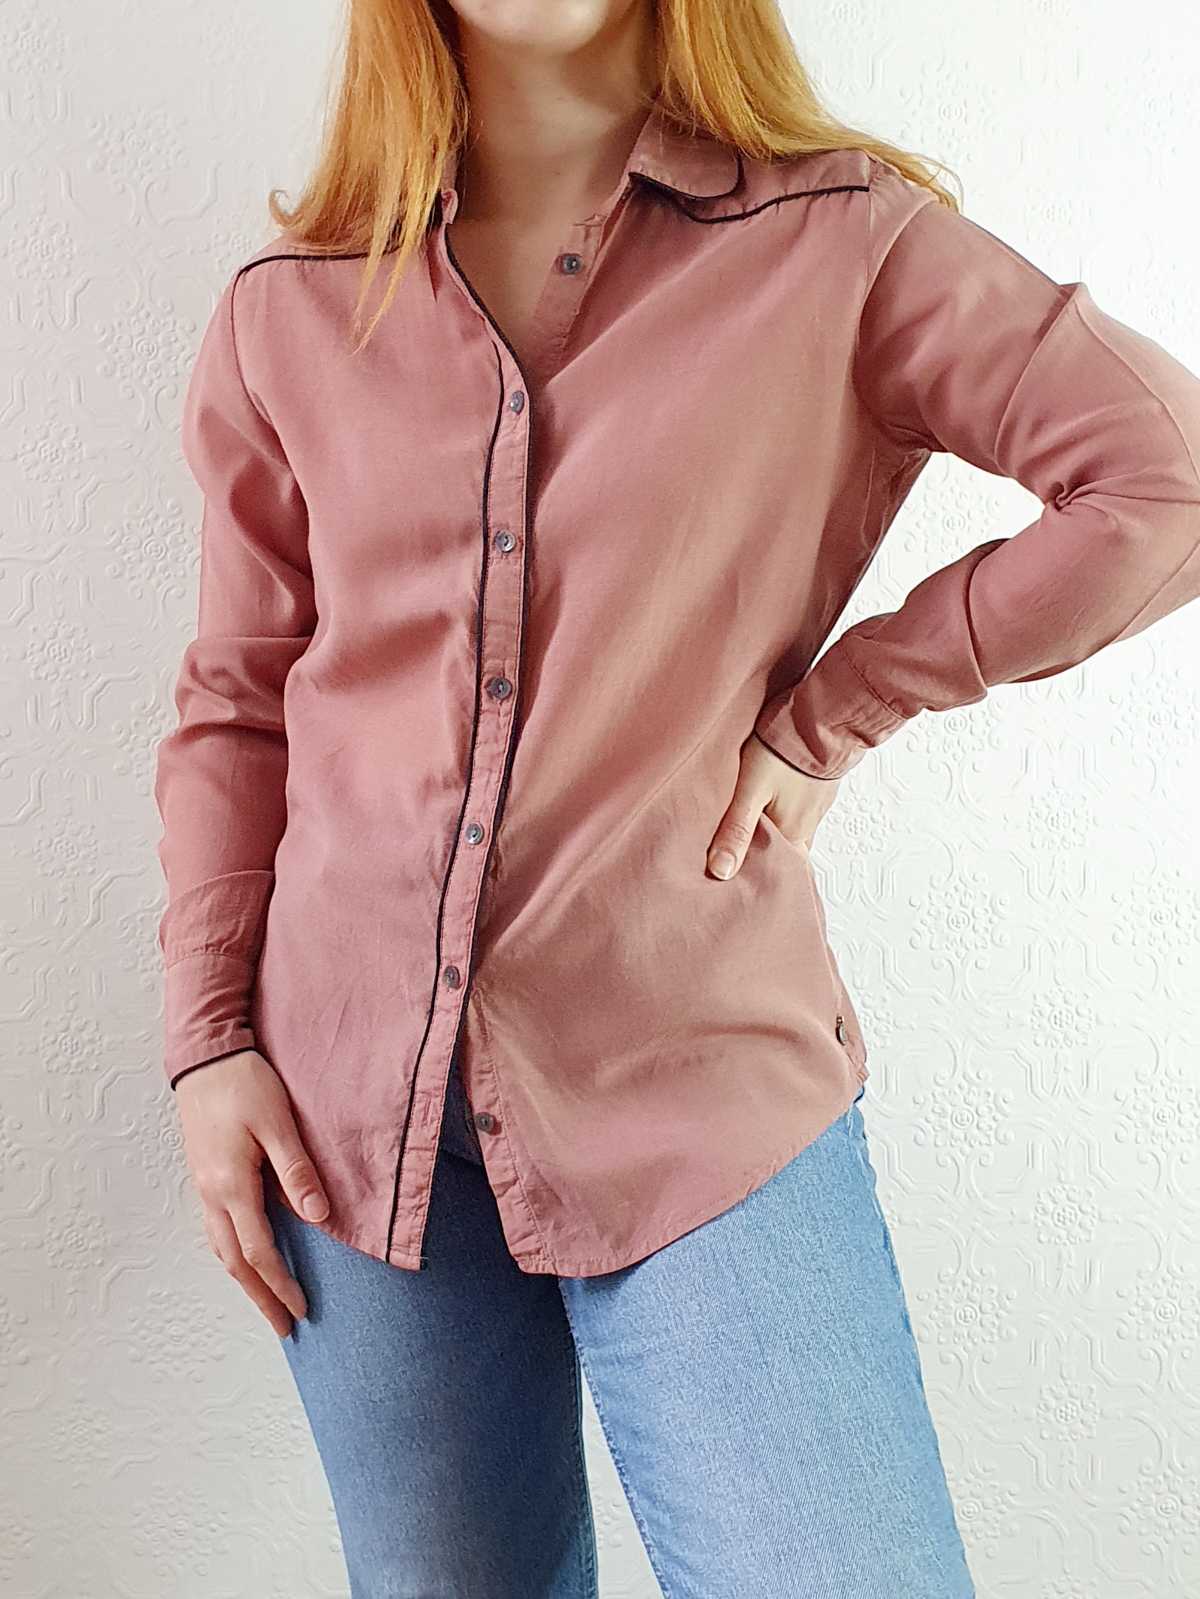 Dusty Pink Round Collar Cotton Blouse - XS/S